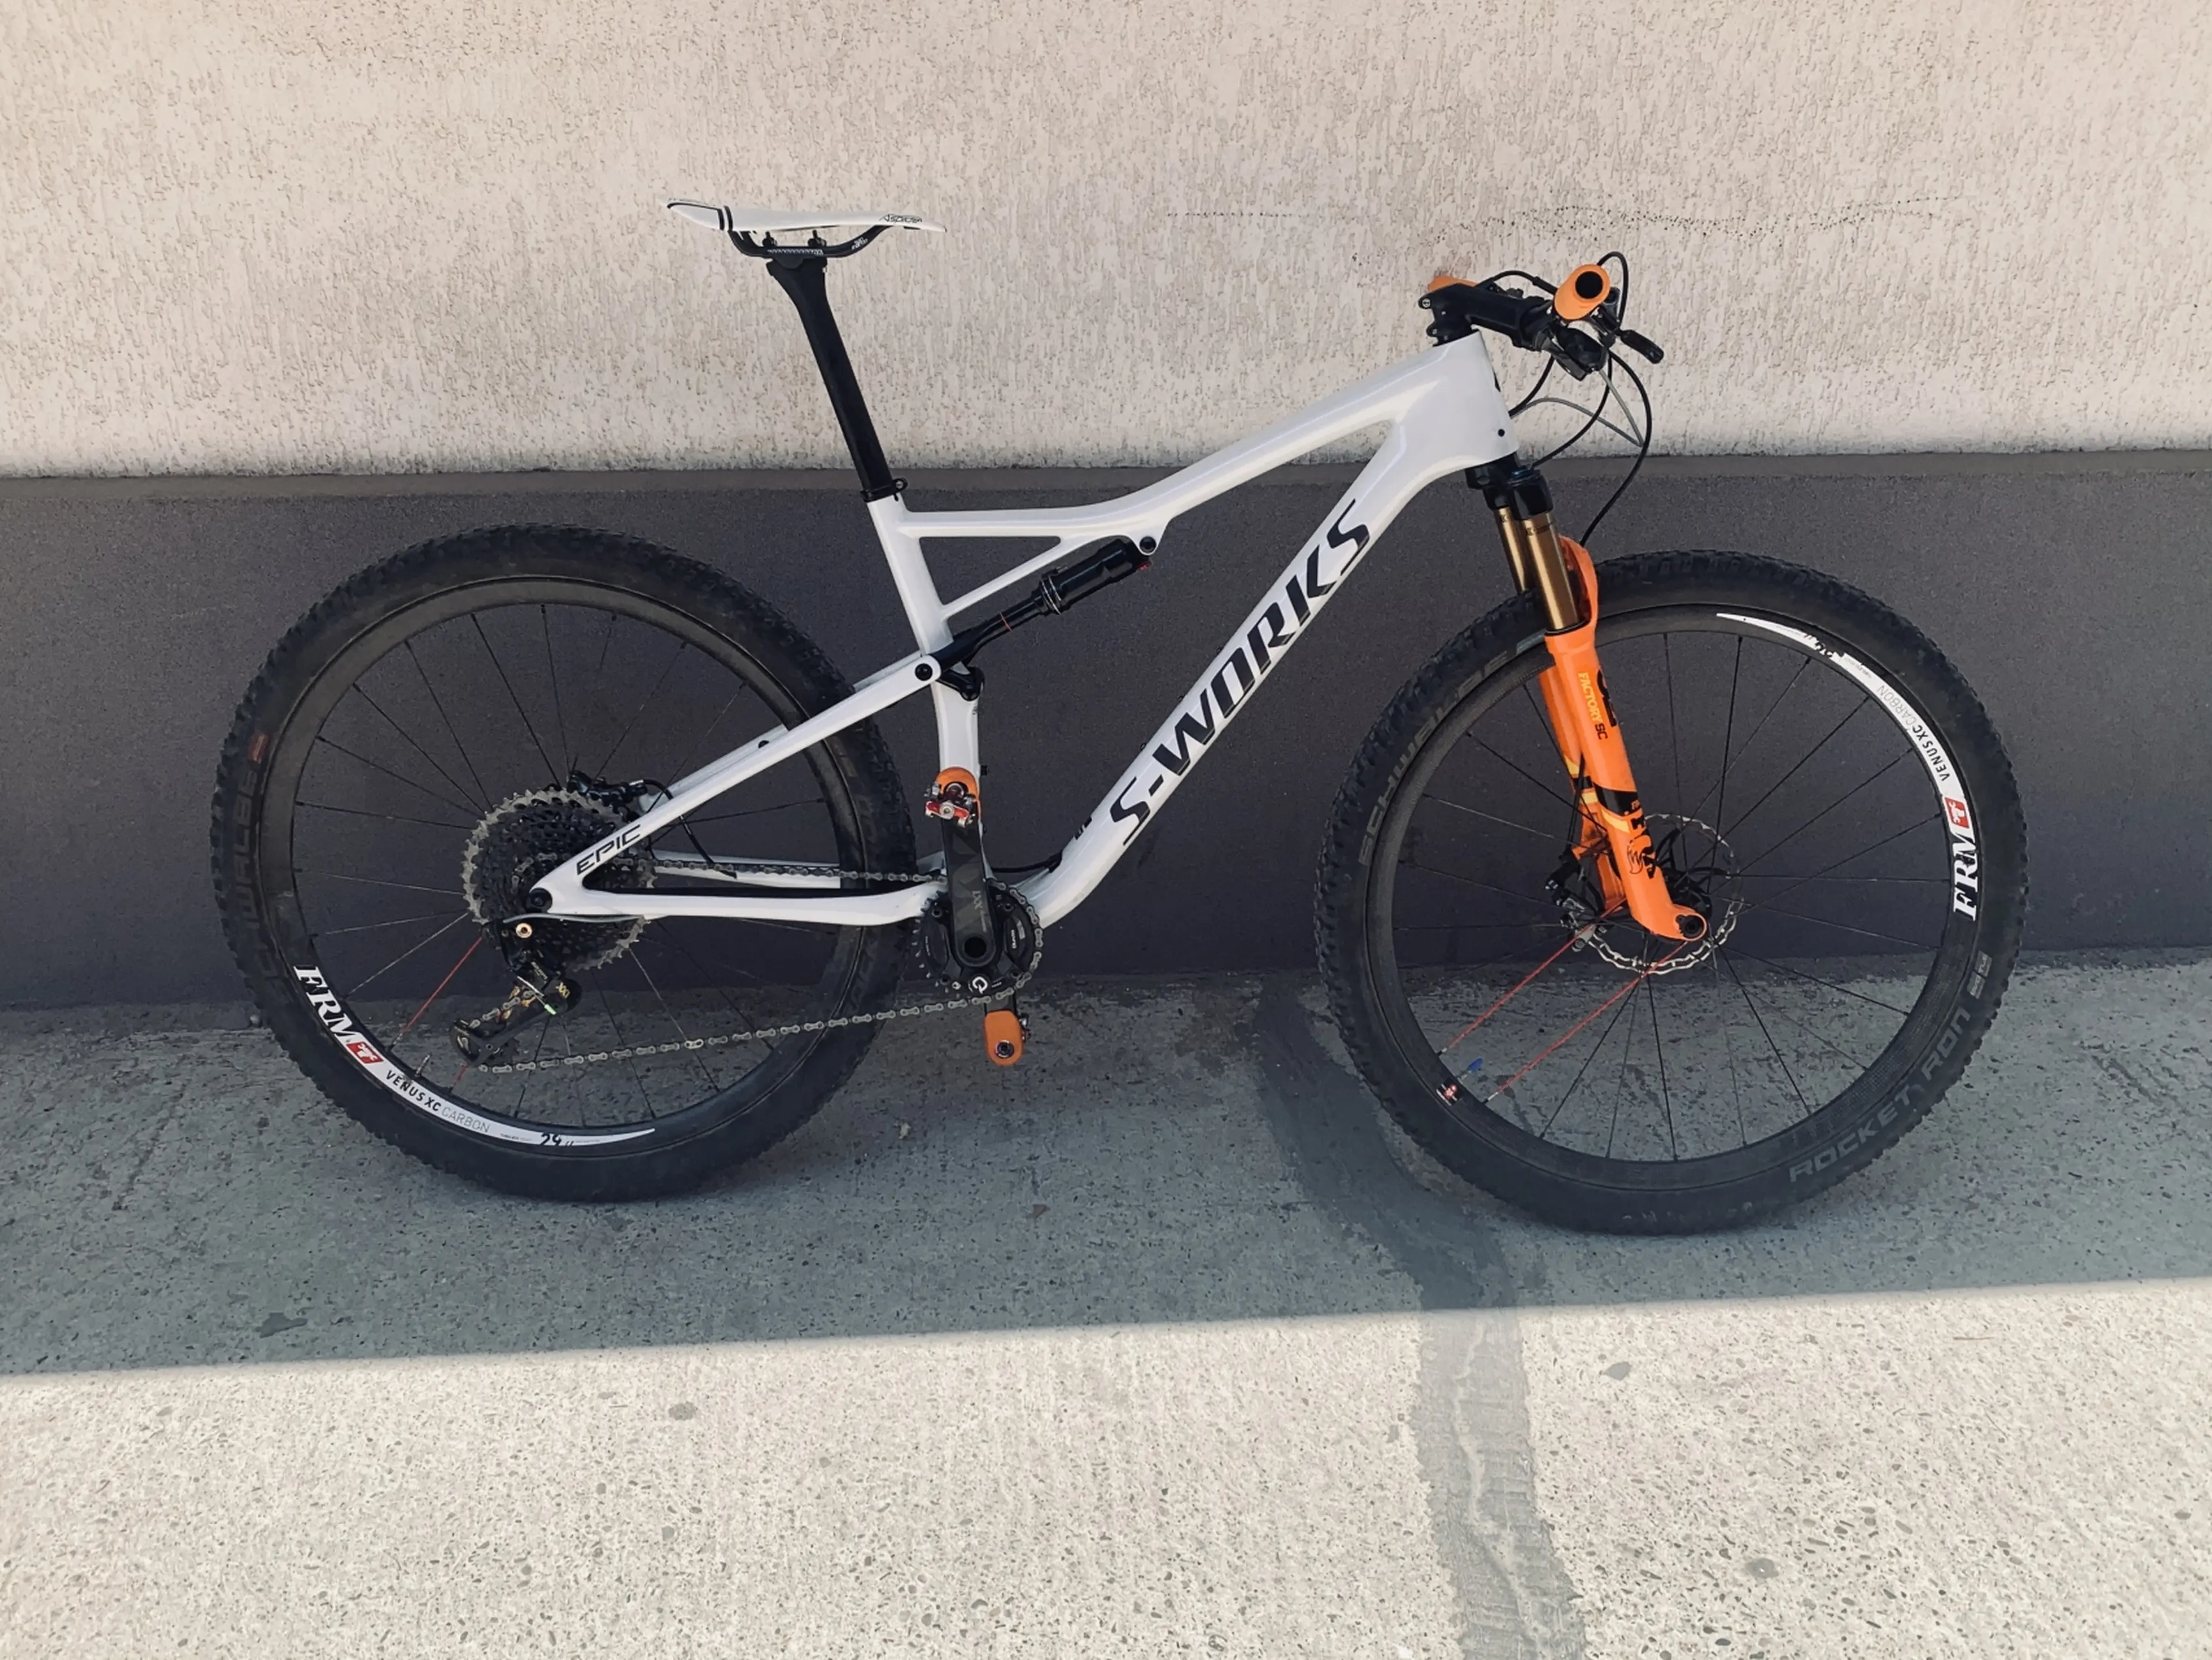 1. Ghidon carbon tune,s-works,ritchey